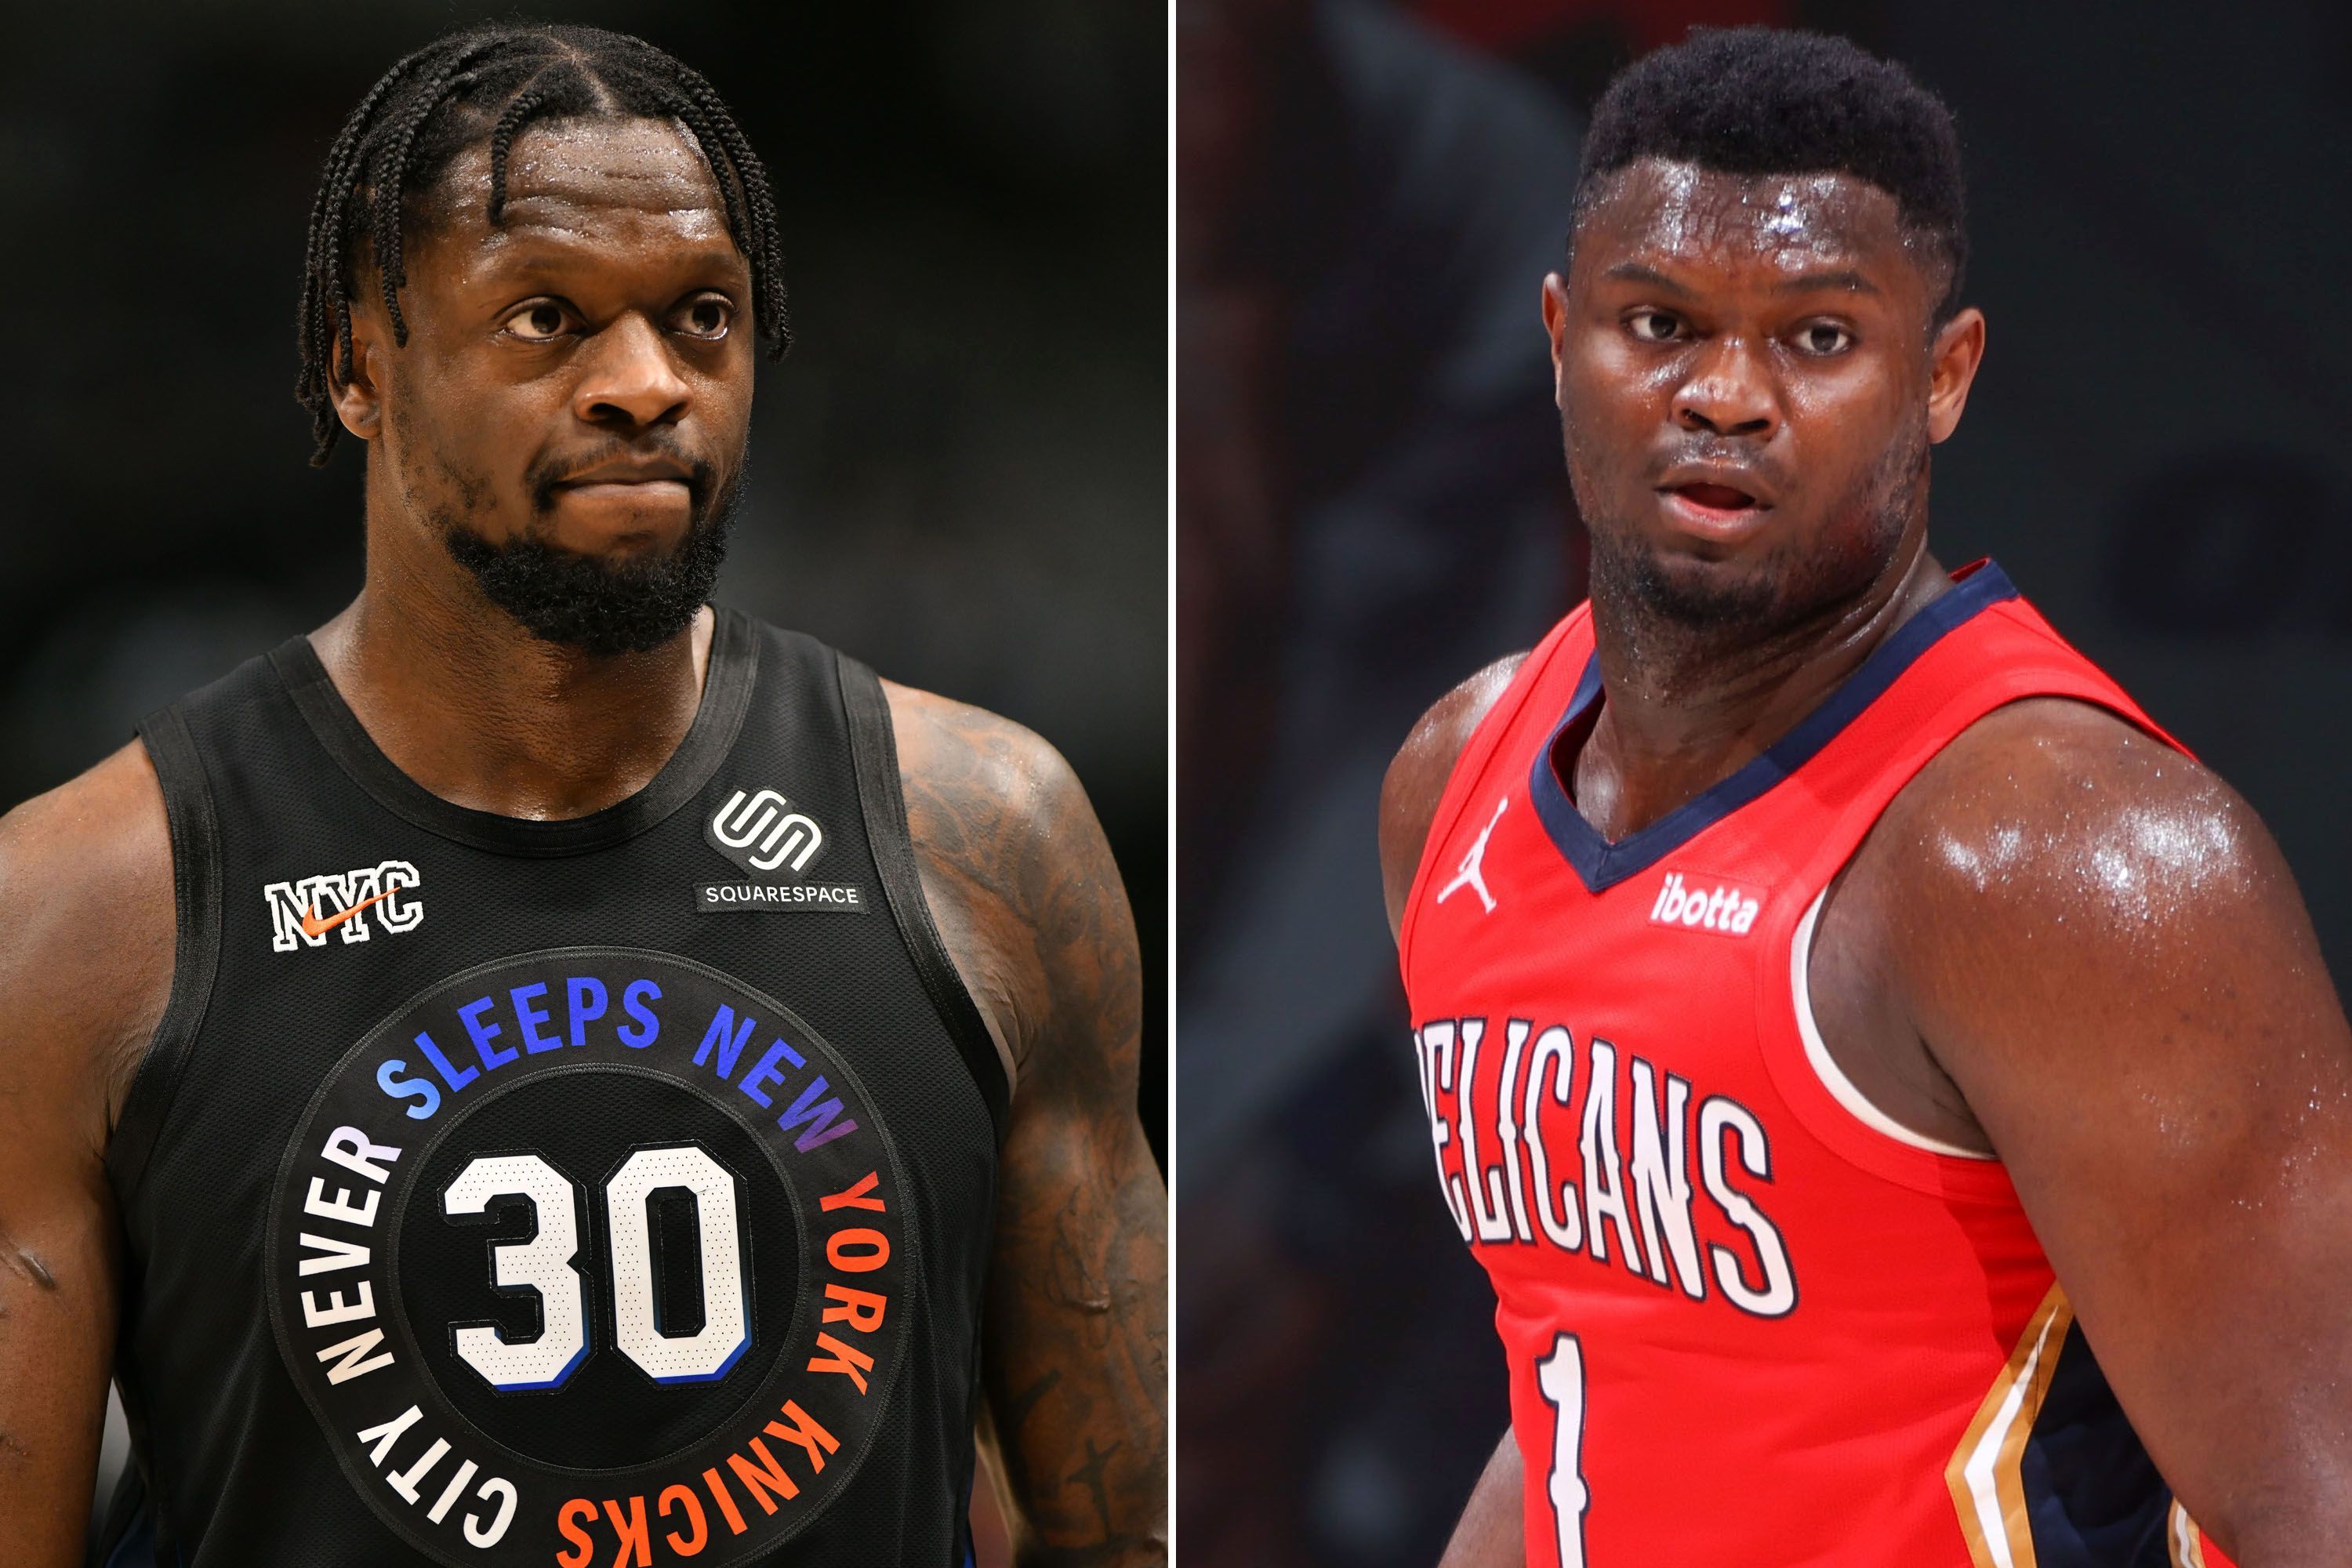 Zion Williamson traded to Knicks for Randle